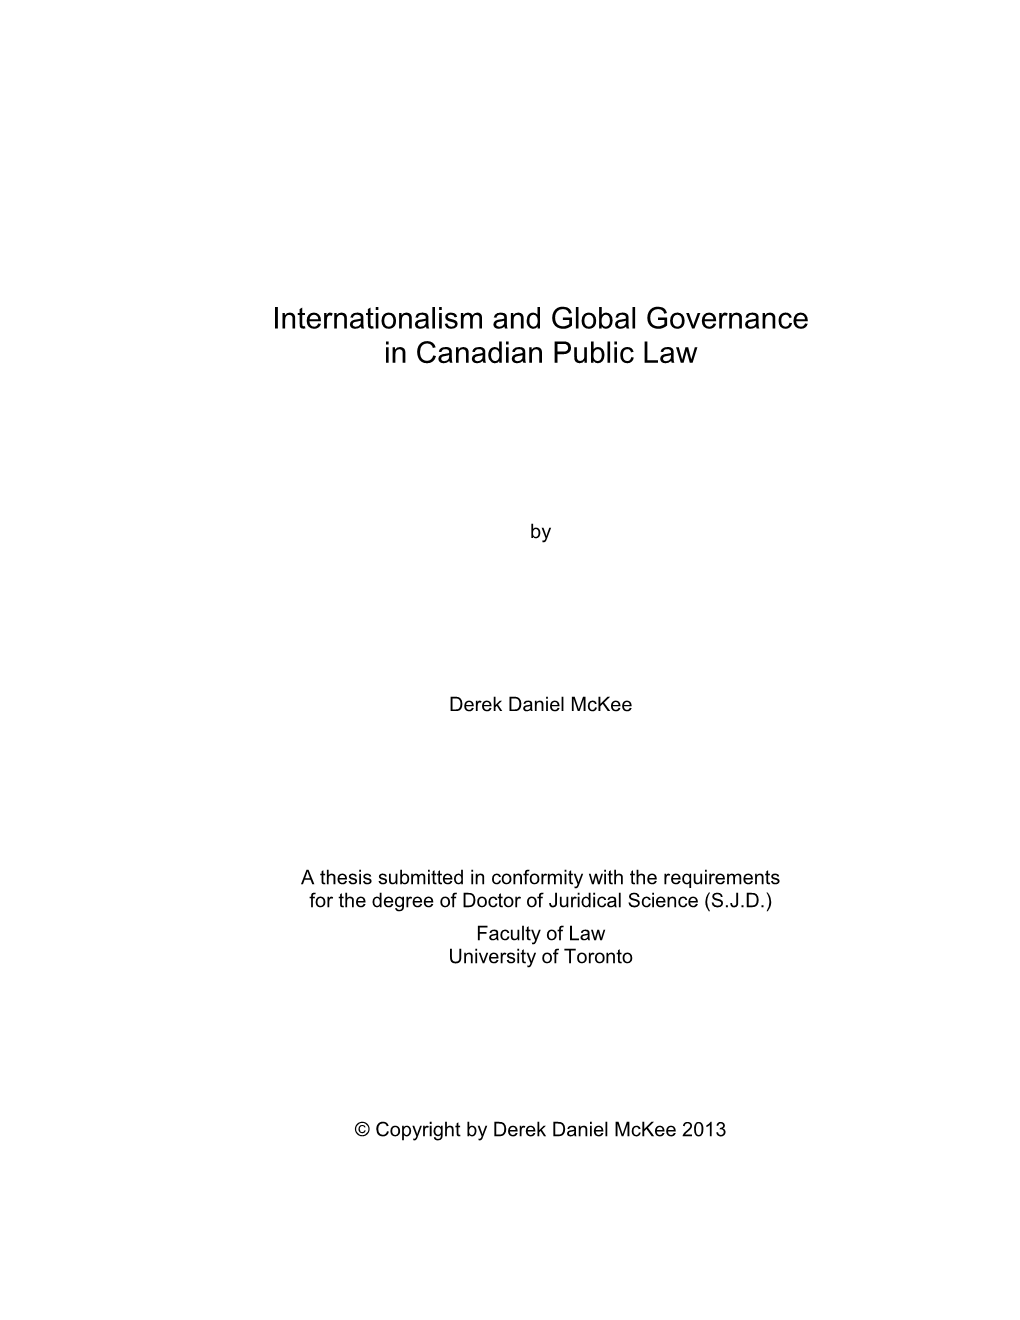 Internationalism and Global Governance in Canadian Public Law